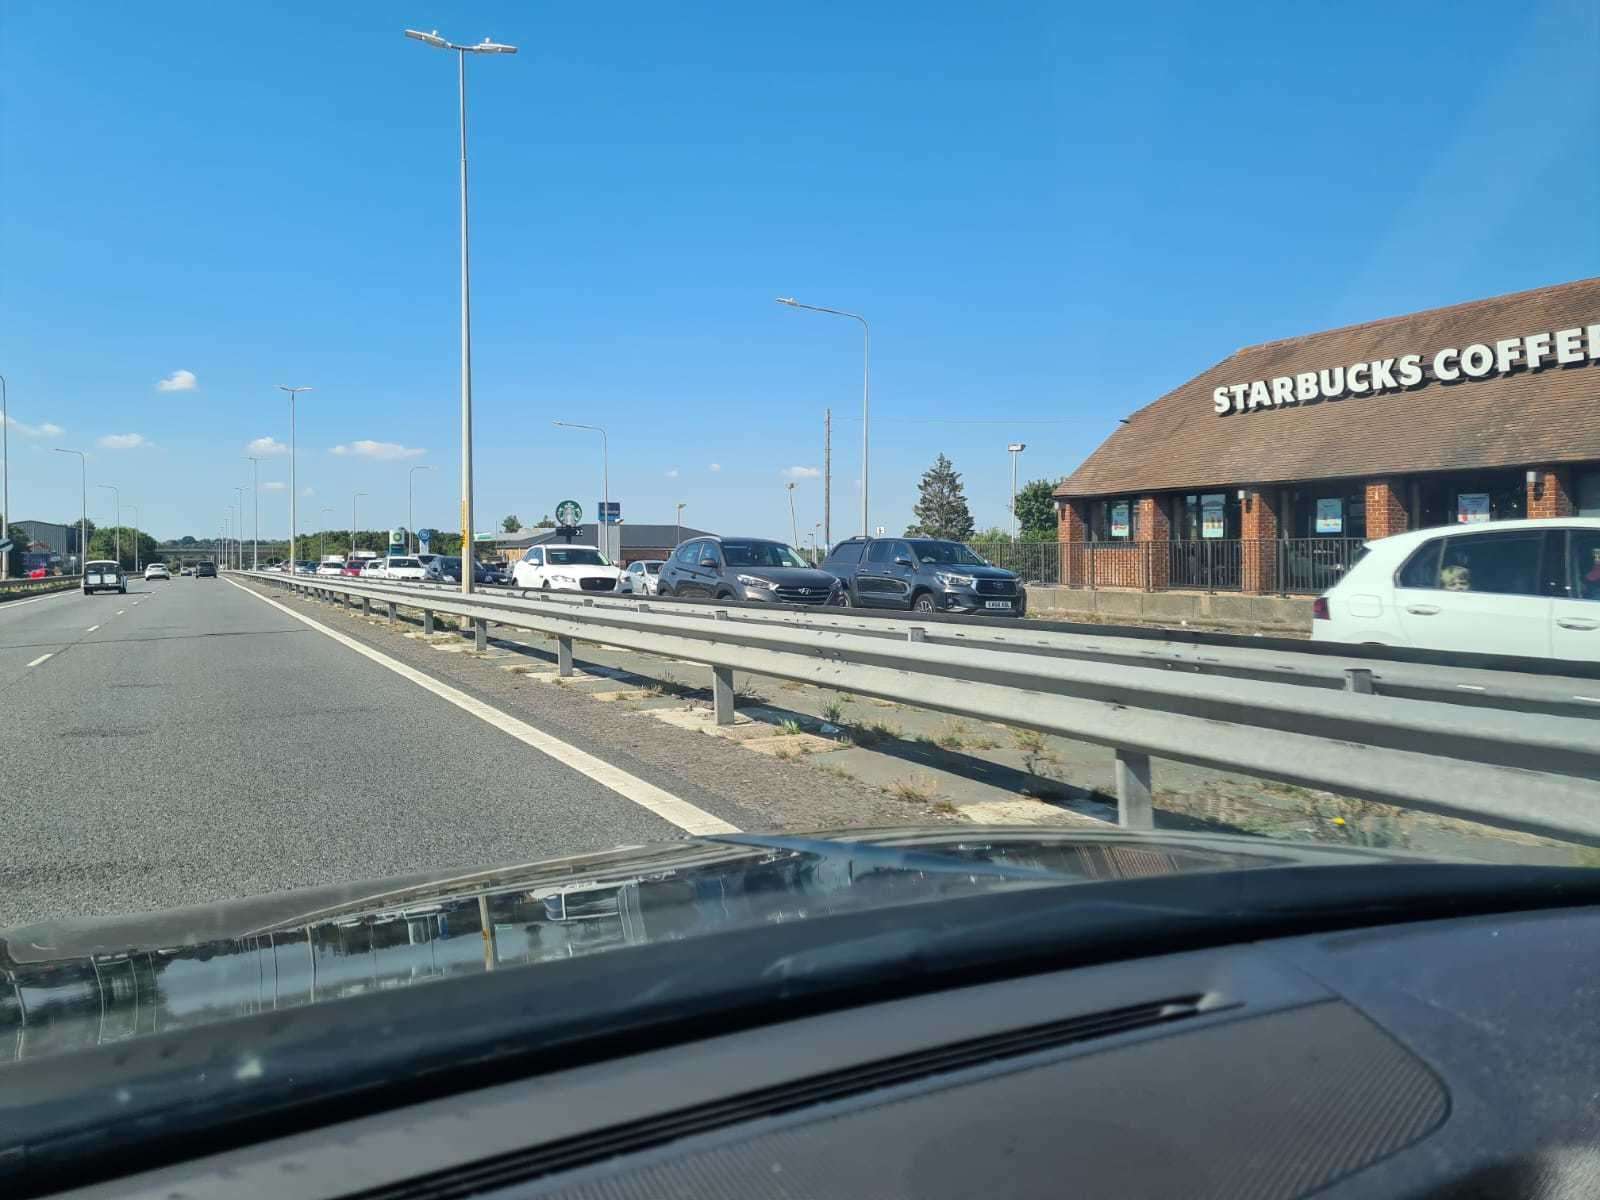 Queues on the A299 Thanet Way near Whitstable today